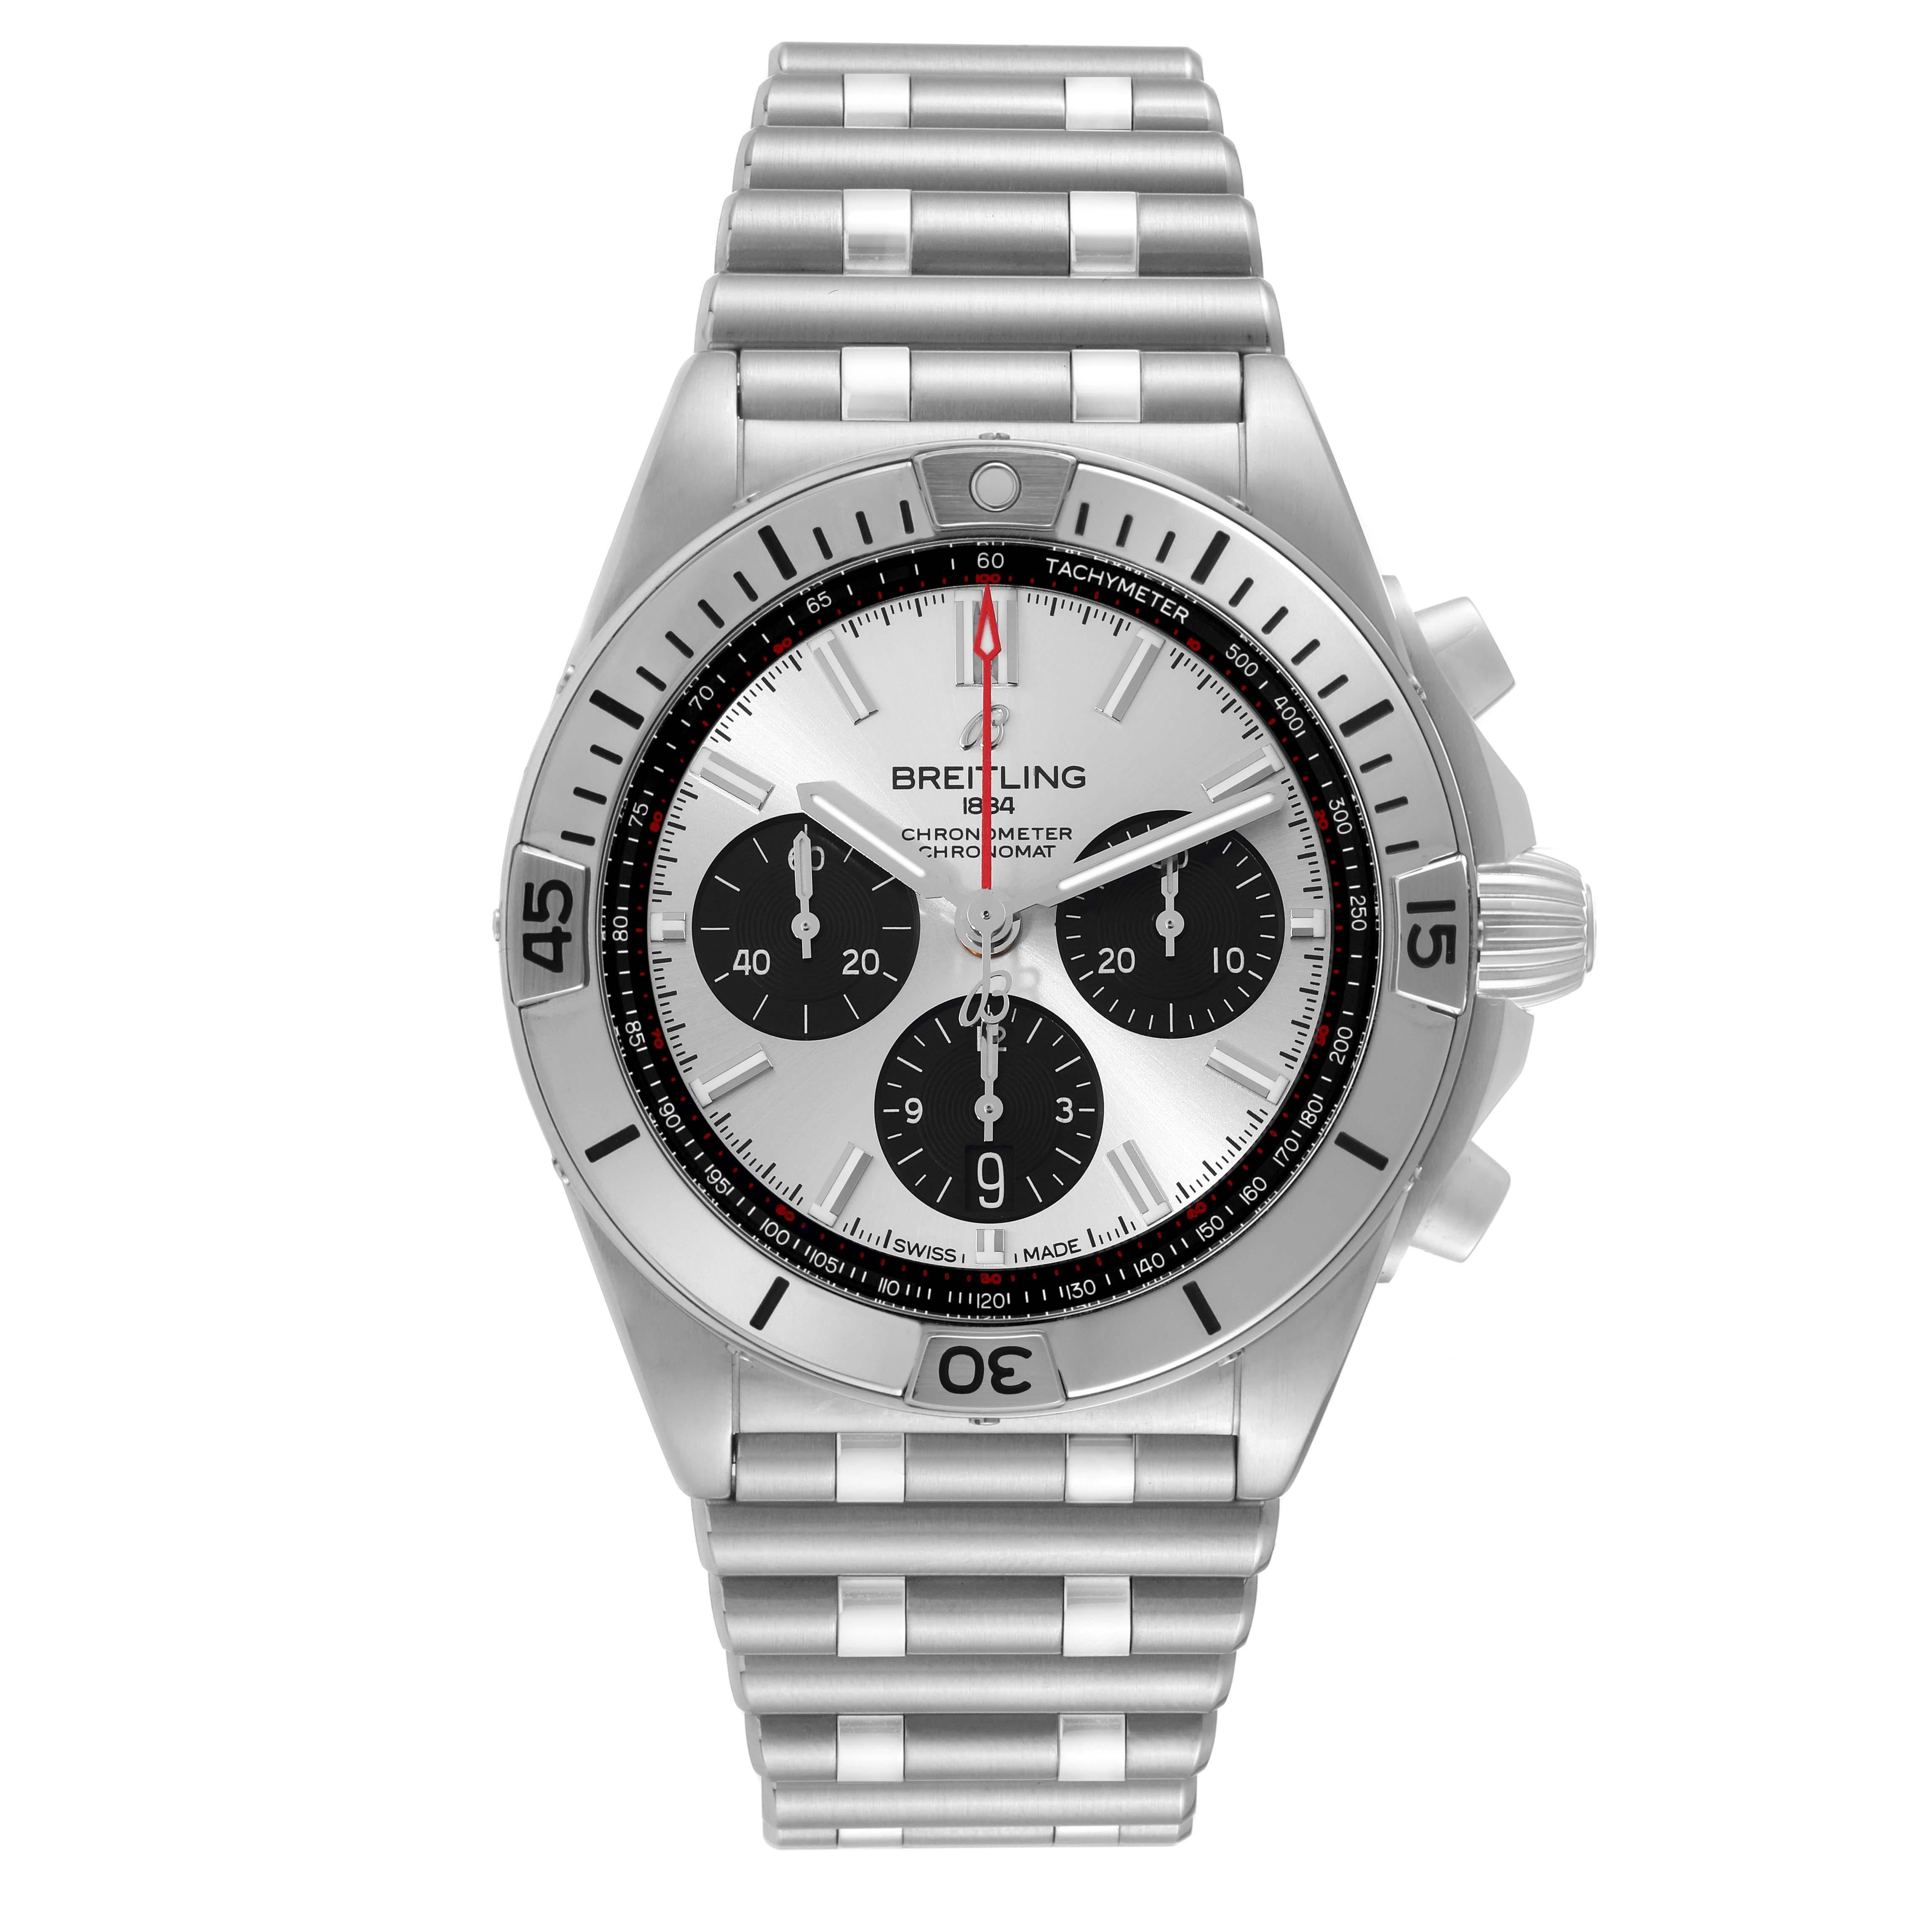 Breitling Chronomat B01 Silver Dial Steel Mens Watch AB0134 Box Card. Self-winding automatic officially certified chronometer movement. Chronograph function. Stainless steel case 42.0 mm in diameter with screwed down crown and pushers. Stainless